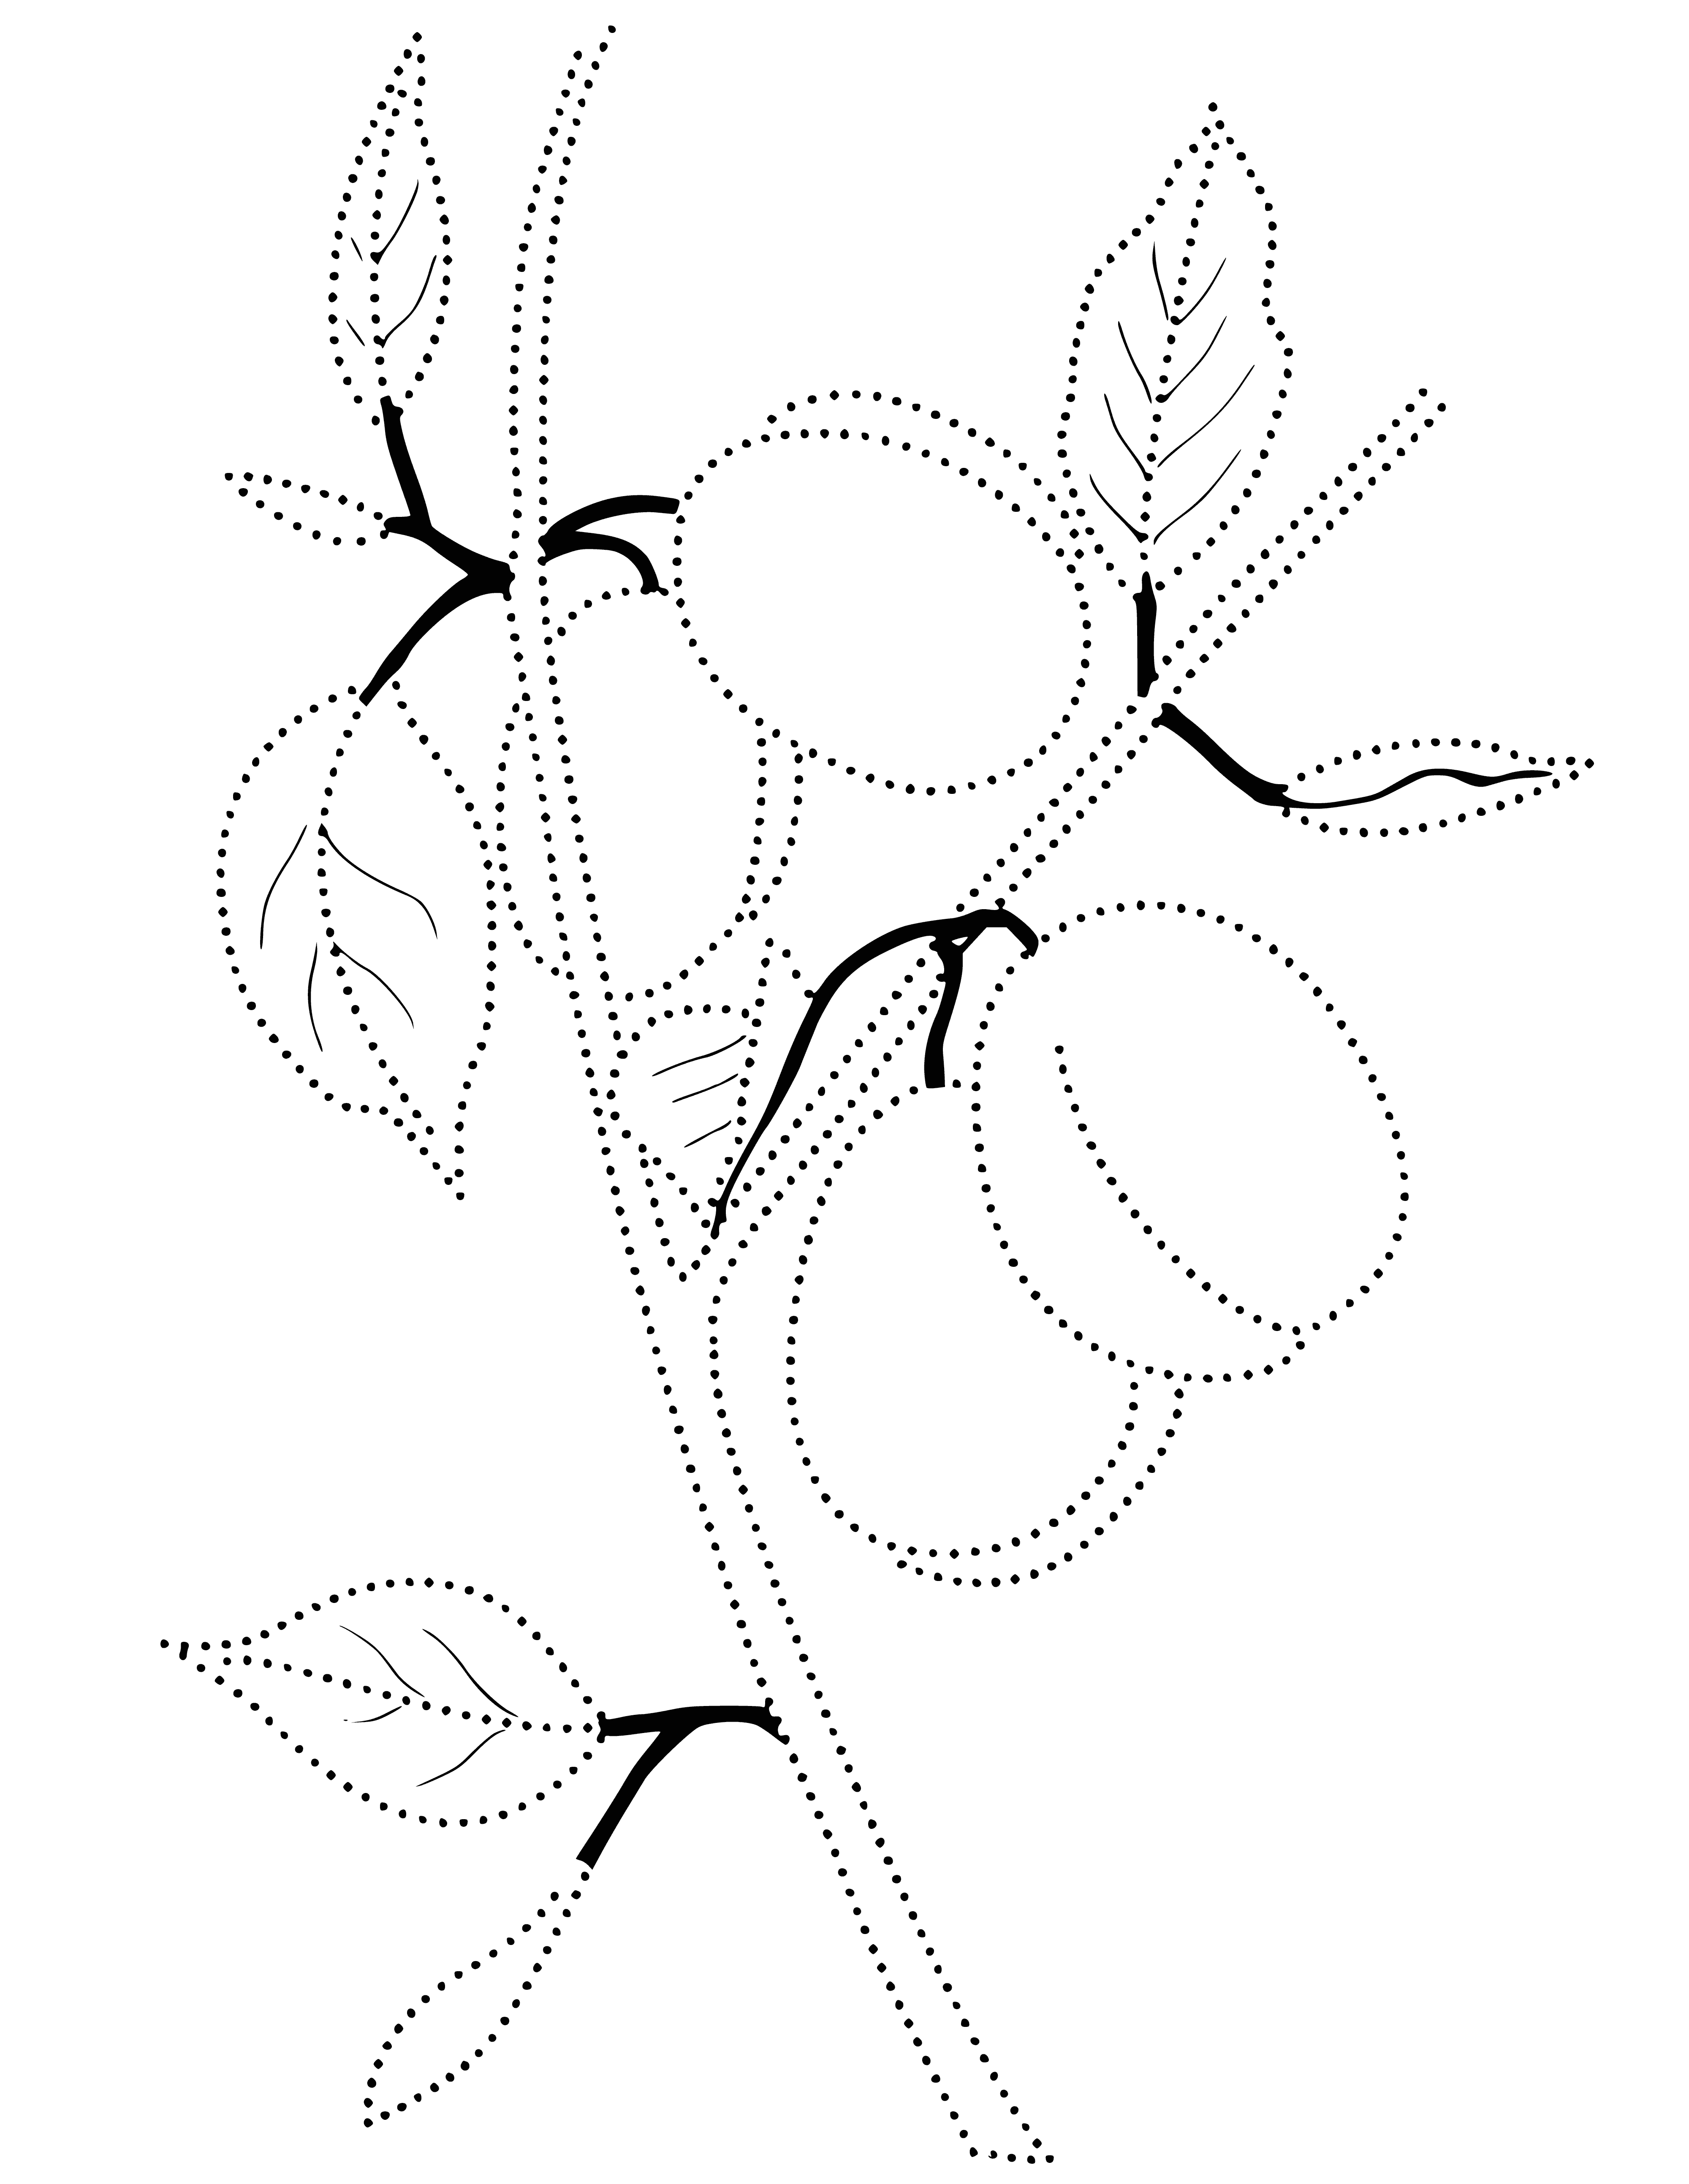 coloring page: 3 dark purple plums arranged on a branch against a light purple background creating a glossy cluster.